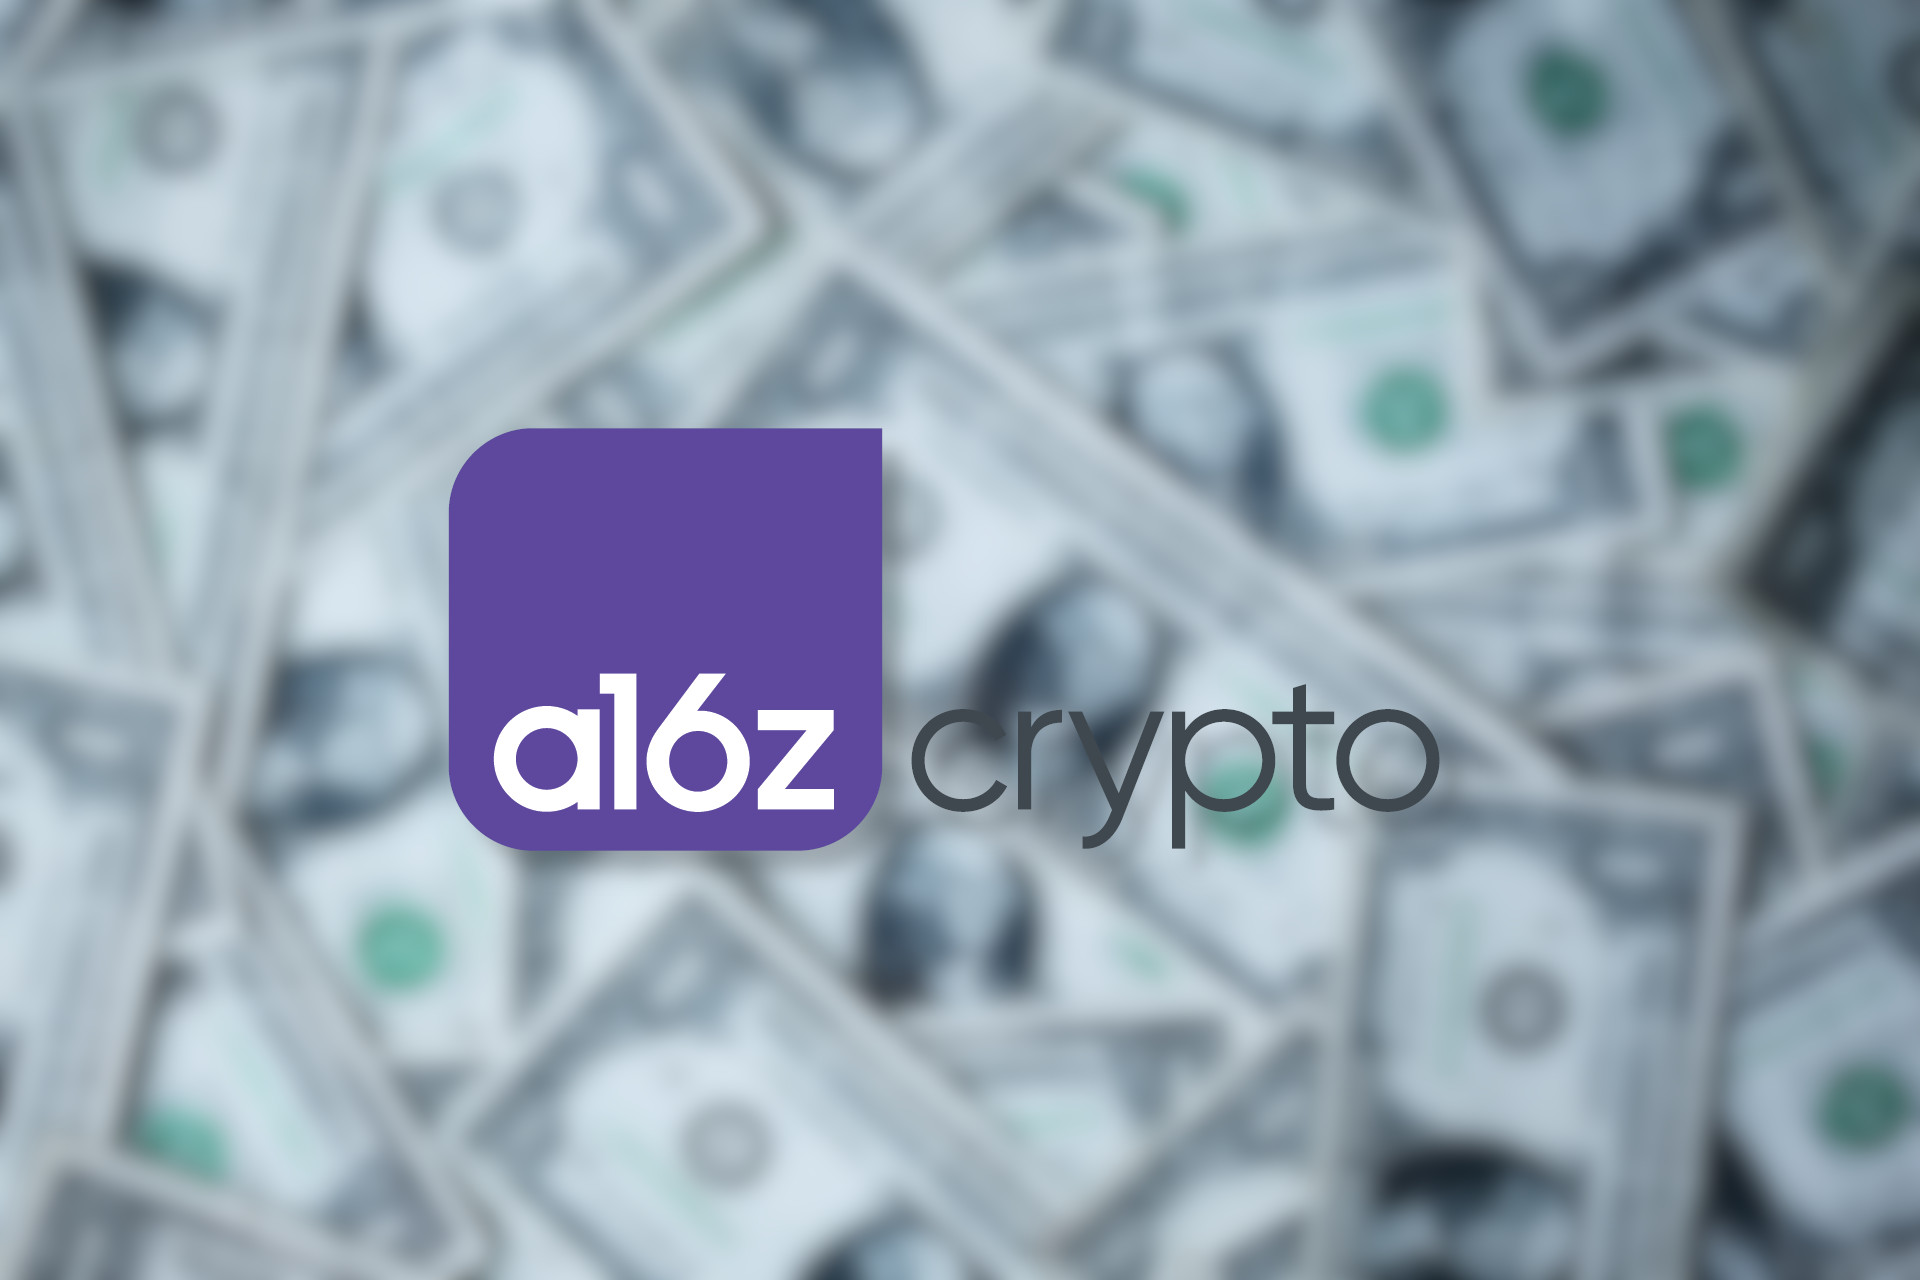 a16z cryptocurrency investment company